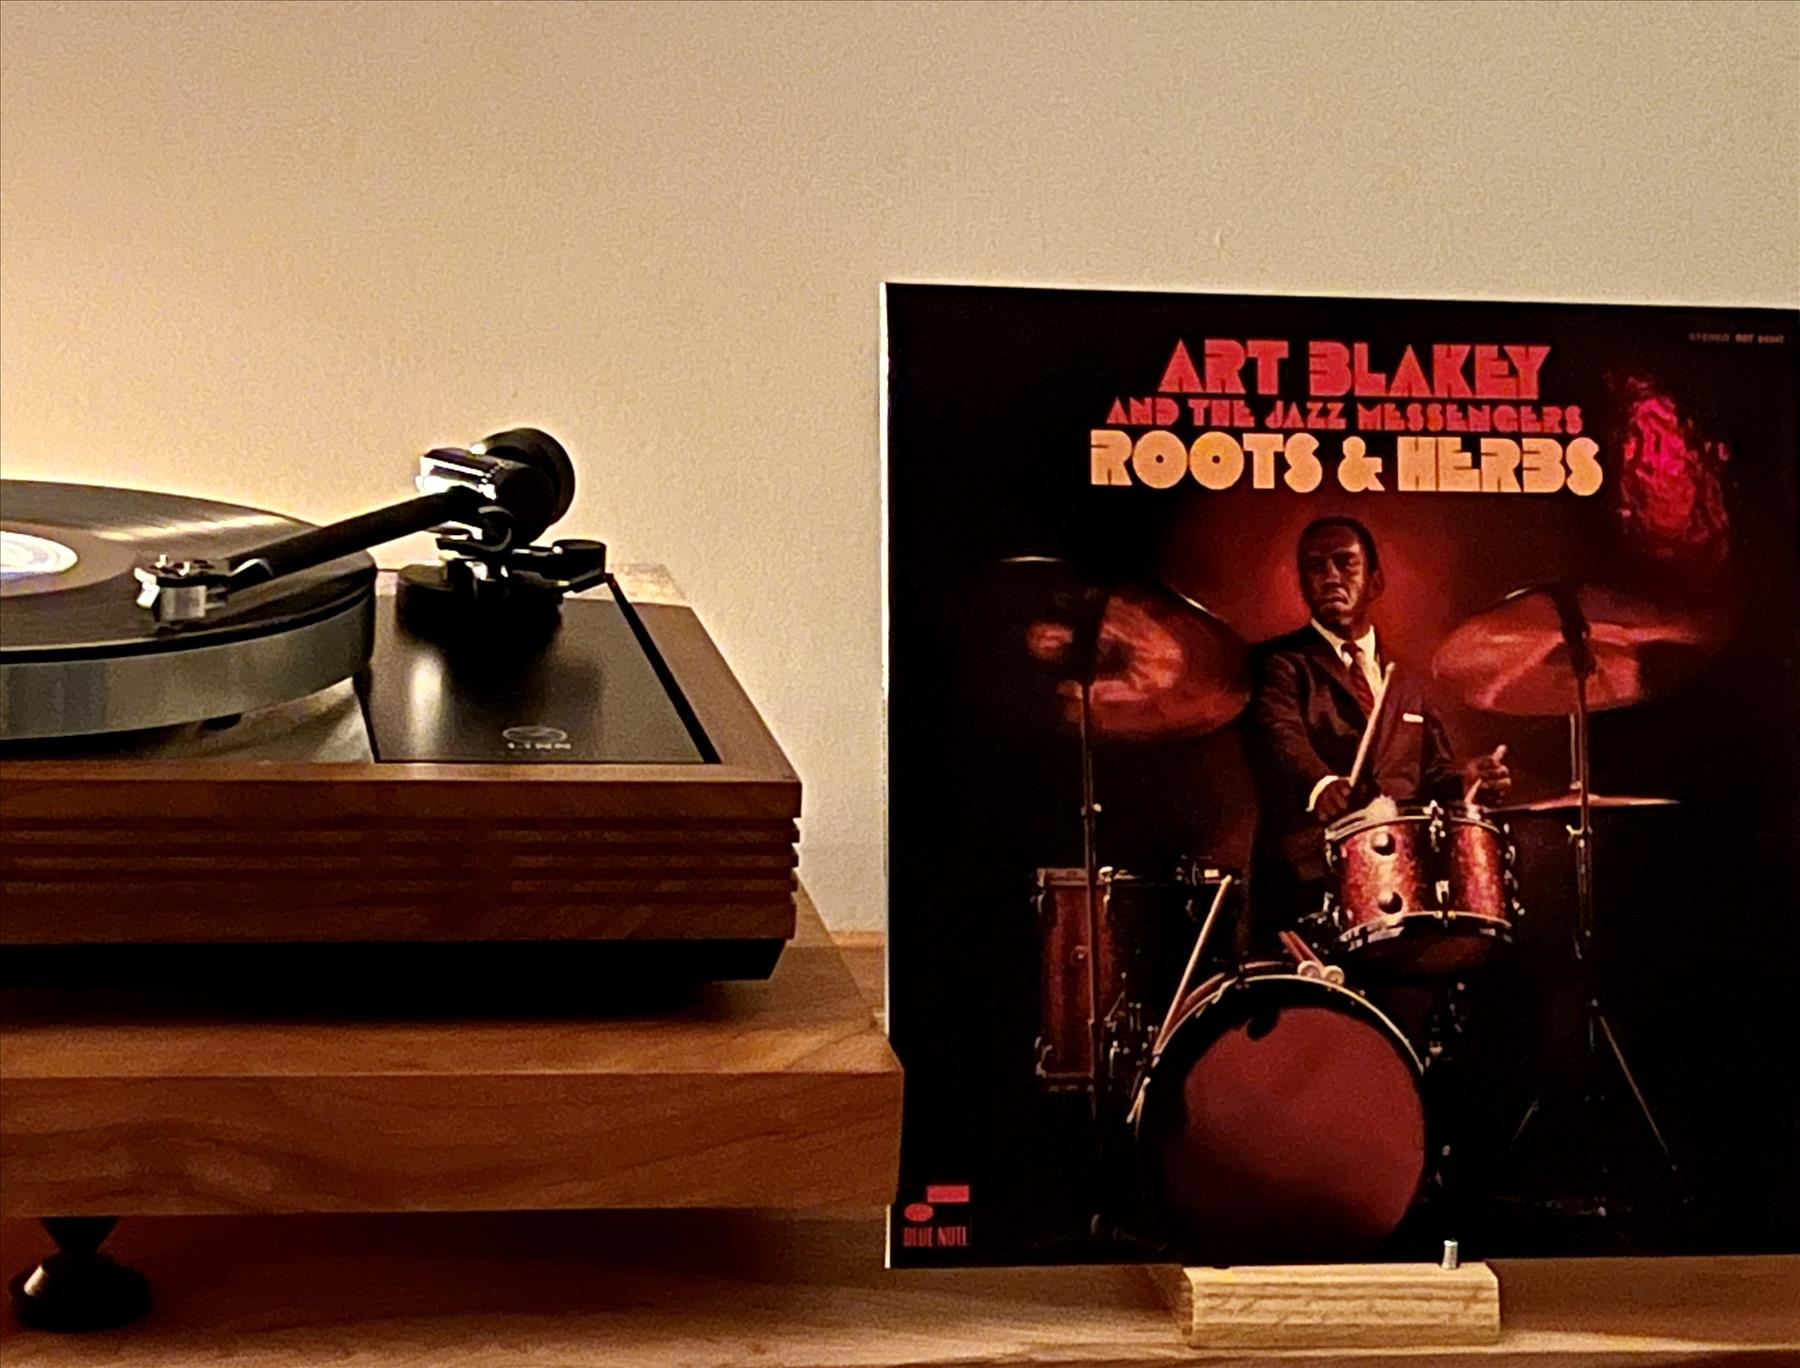 Art Blakey and The Jazz Messengers: Roots & Herbs